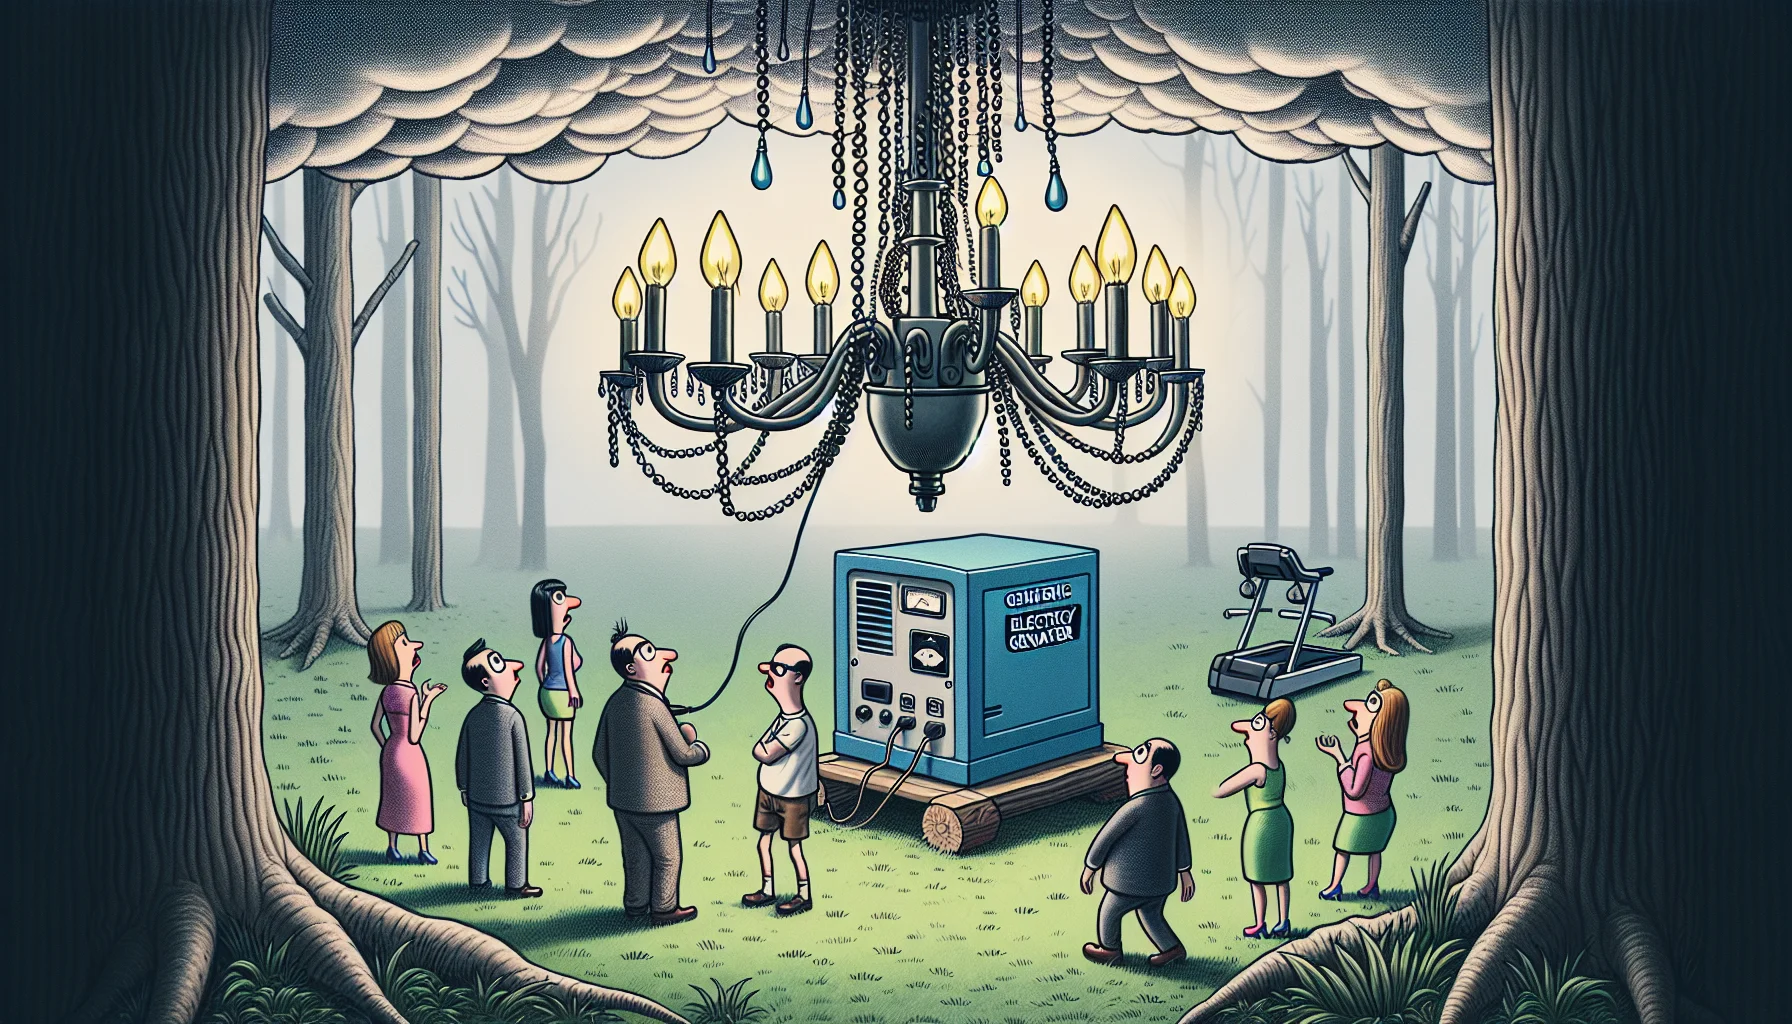 Create a humorous and realistic scene showcasing a high-quality, generic electricity generator filter. The setting is a cartoonishly overcast day, and the filter is helping power a variety of amusingly ill-suited electrical devices outdoors. For instance, this might include an elaborate indoor chandelier hanging from a tree or an electric treadmill on a hiking trail. The filter works flawlessly, causing bystanders - a group of mixed gender and diverse racial descent, including Caucasian, Hispanic, and Middle-Eastern - to stare in surprise and amusement, considering their own switch to generator power.